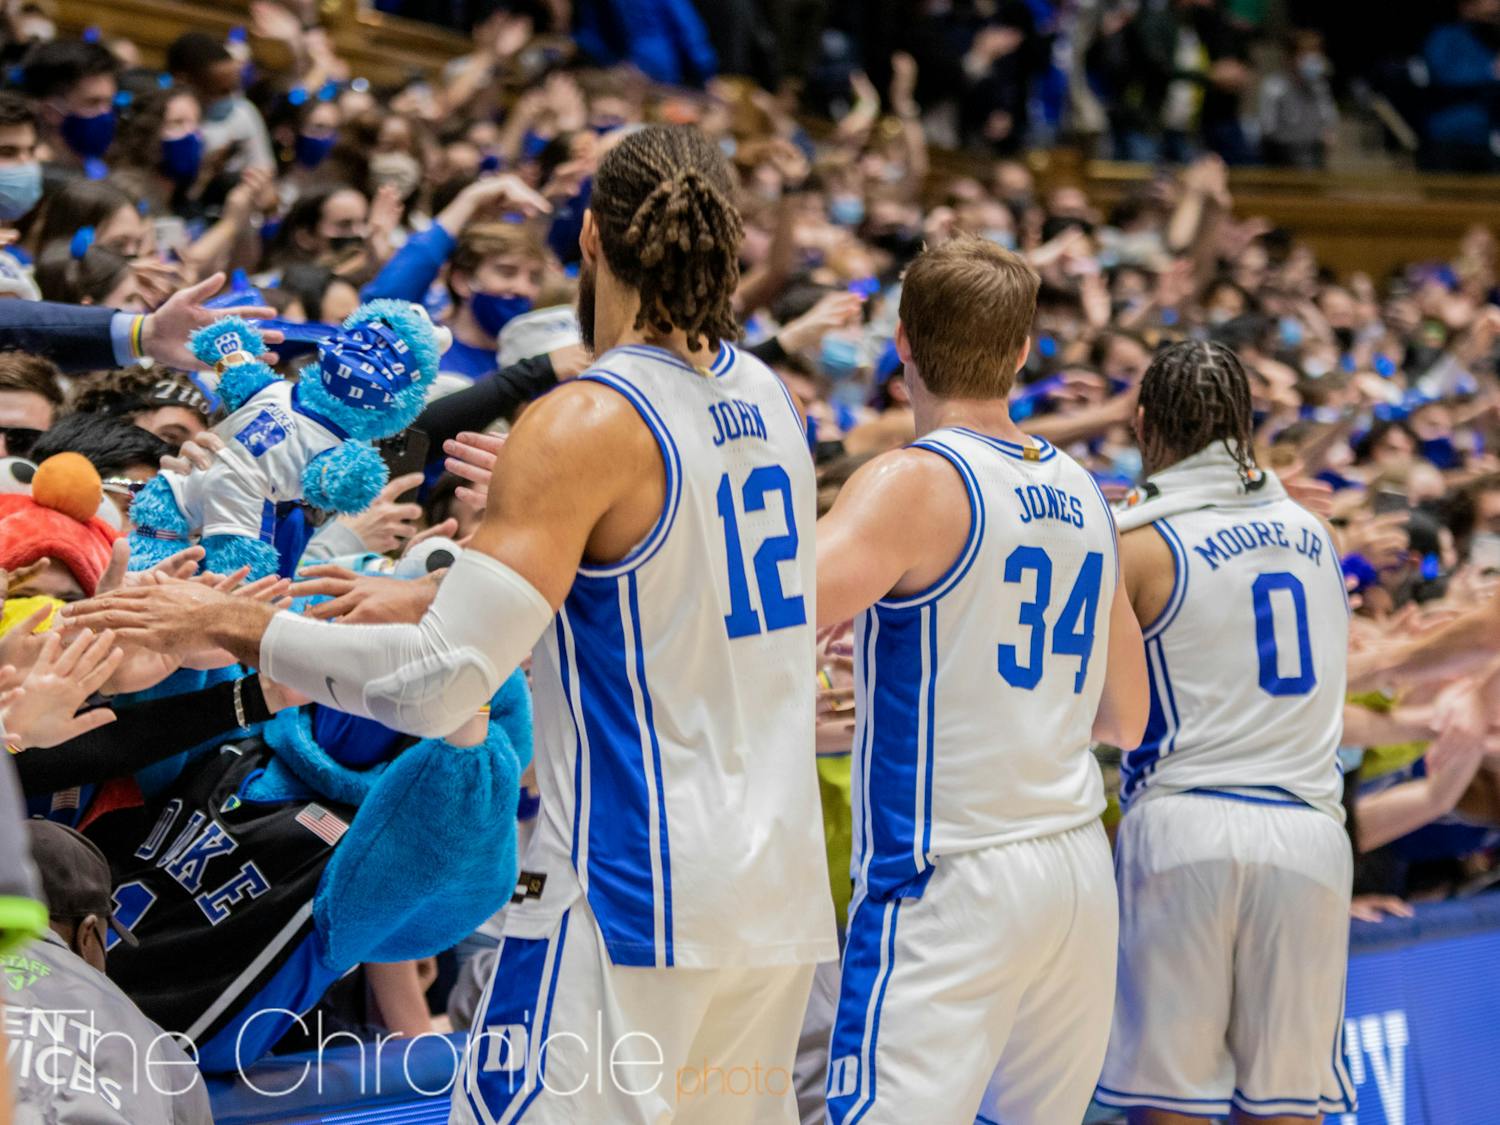 Duke leads this week's Power Rankings as our beat writers' unanimous top choice.